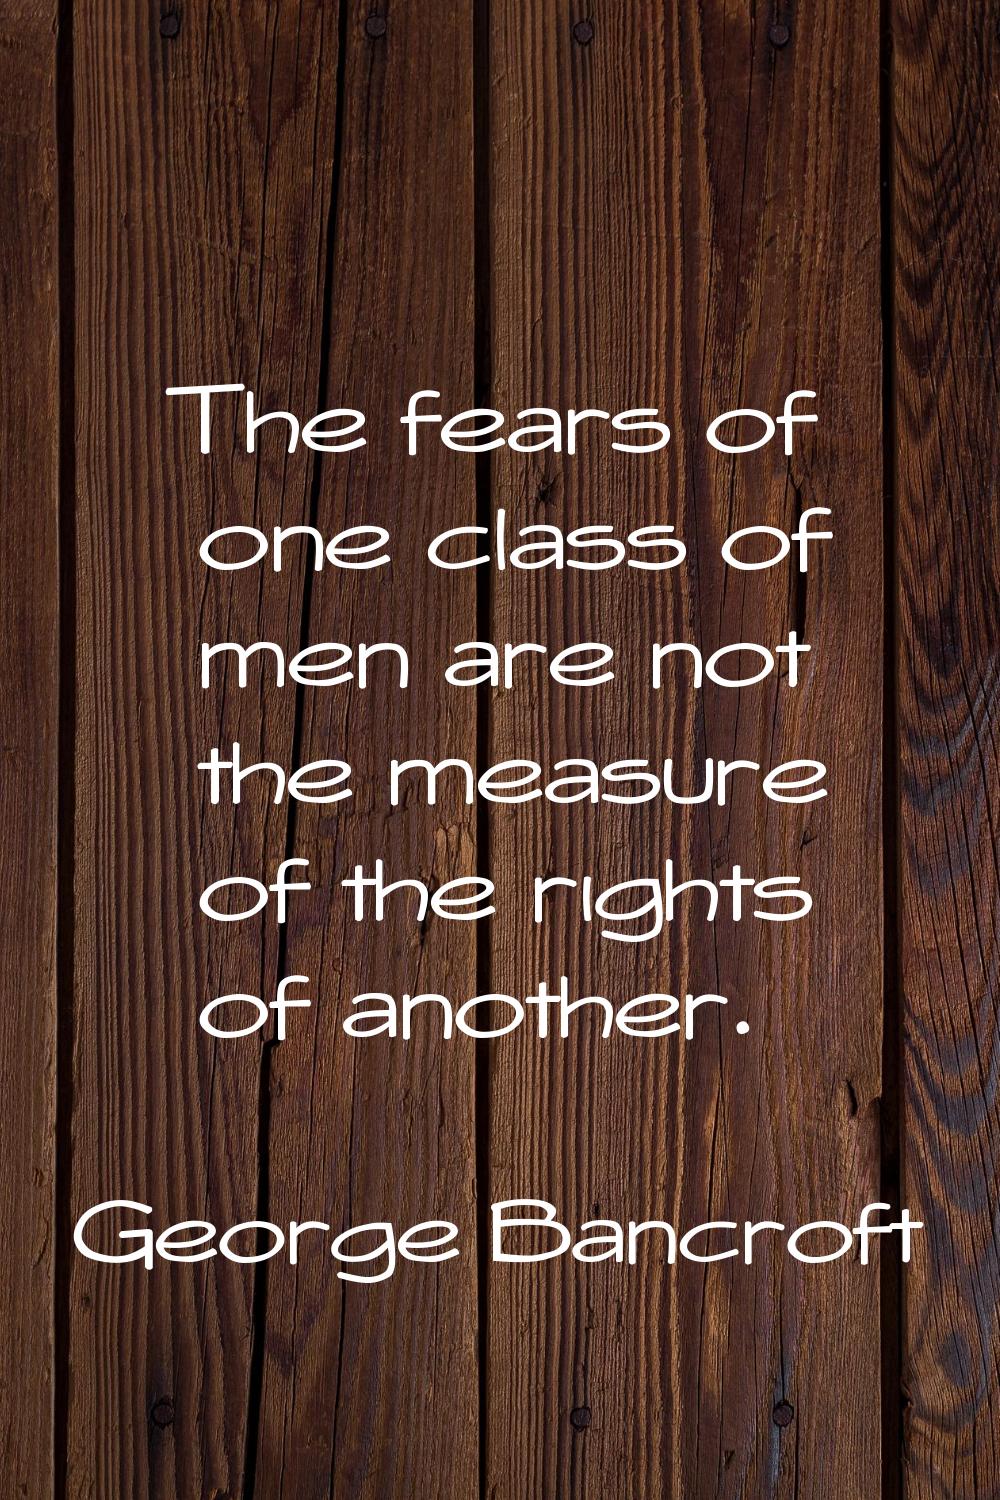 The fears of one class of men are not the measure of the rights of another.